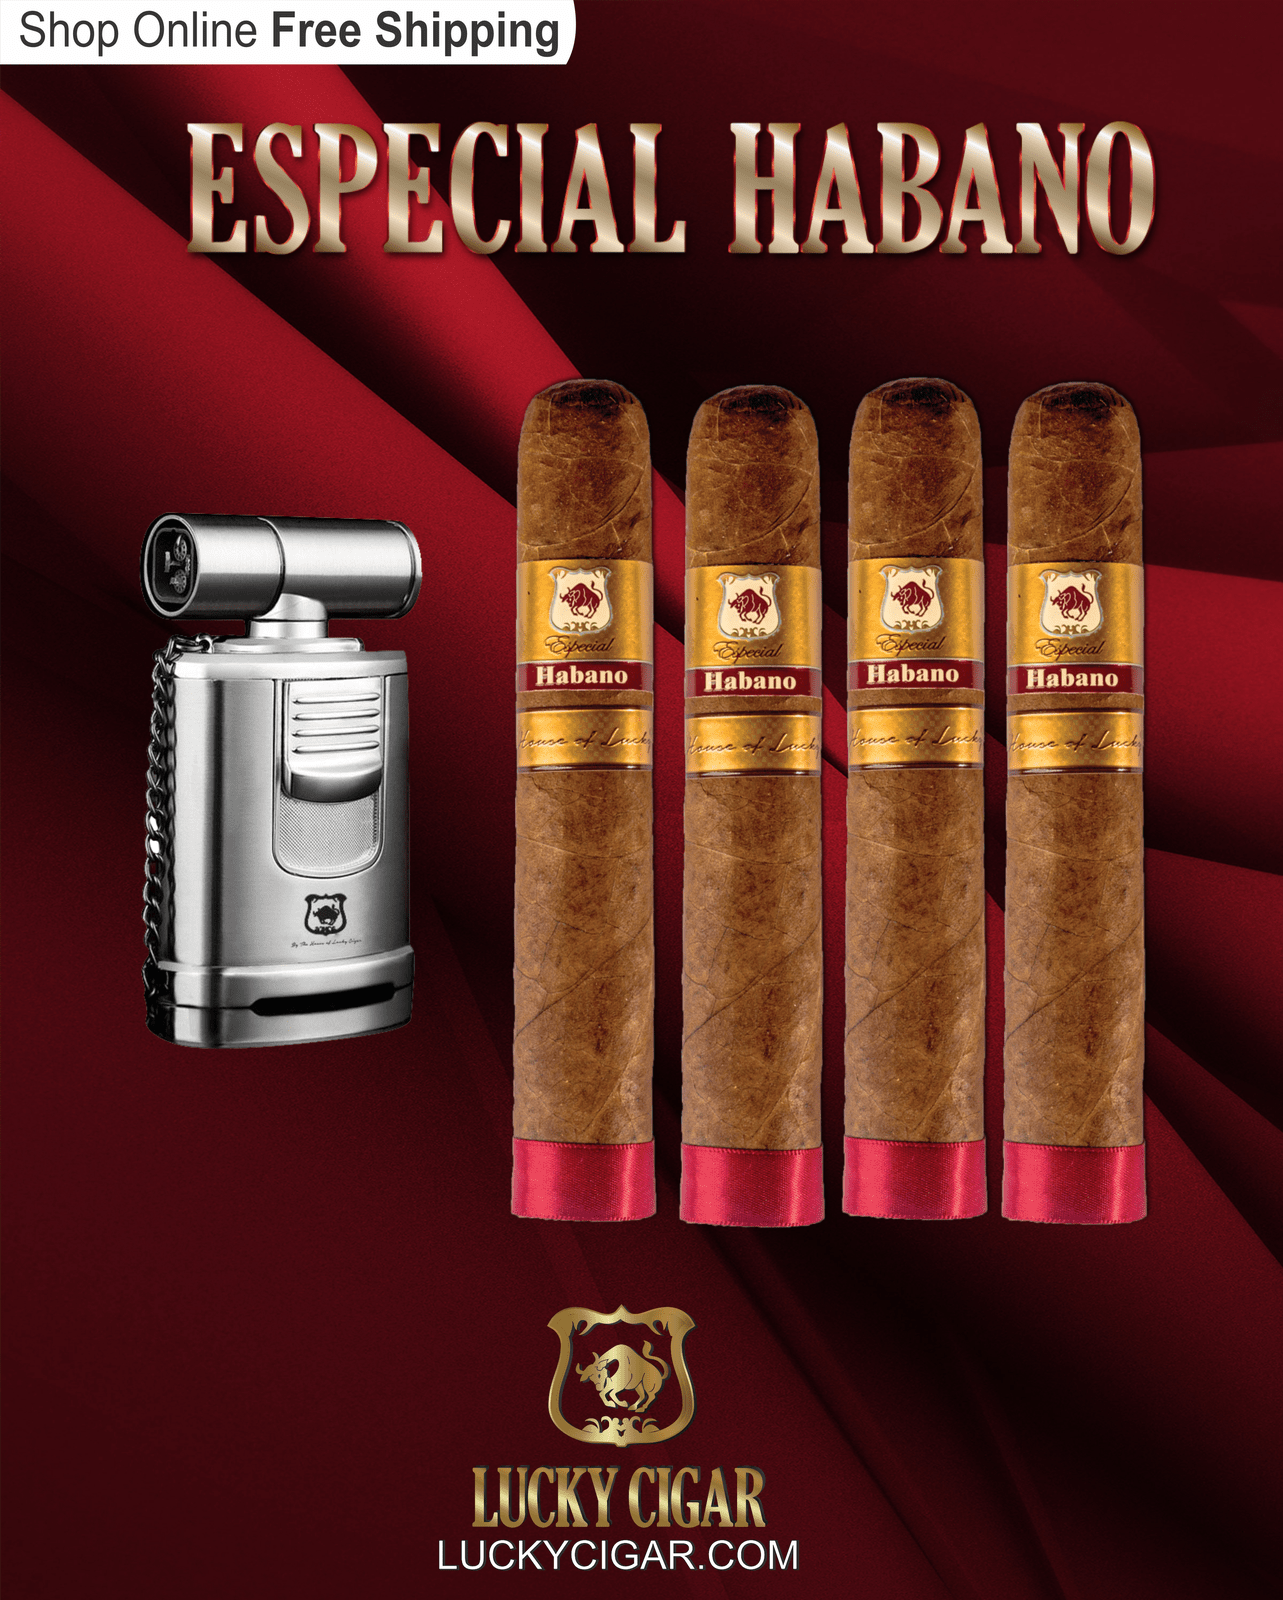 Habano Cigars: Especial Habano by Lucky Cigar: Set of 4 Cigars 2 Toro with Torch